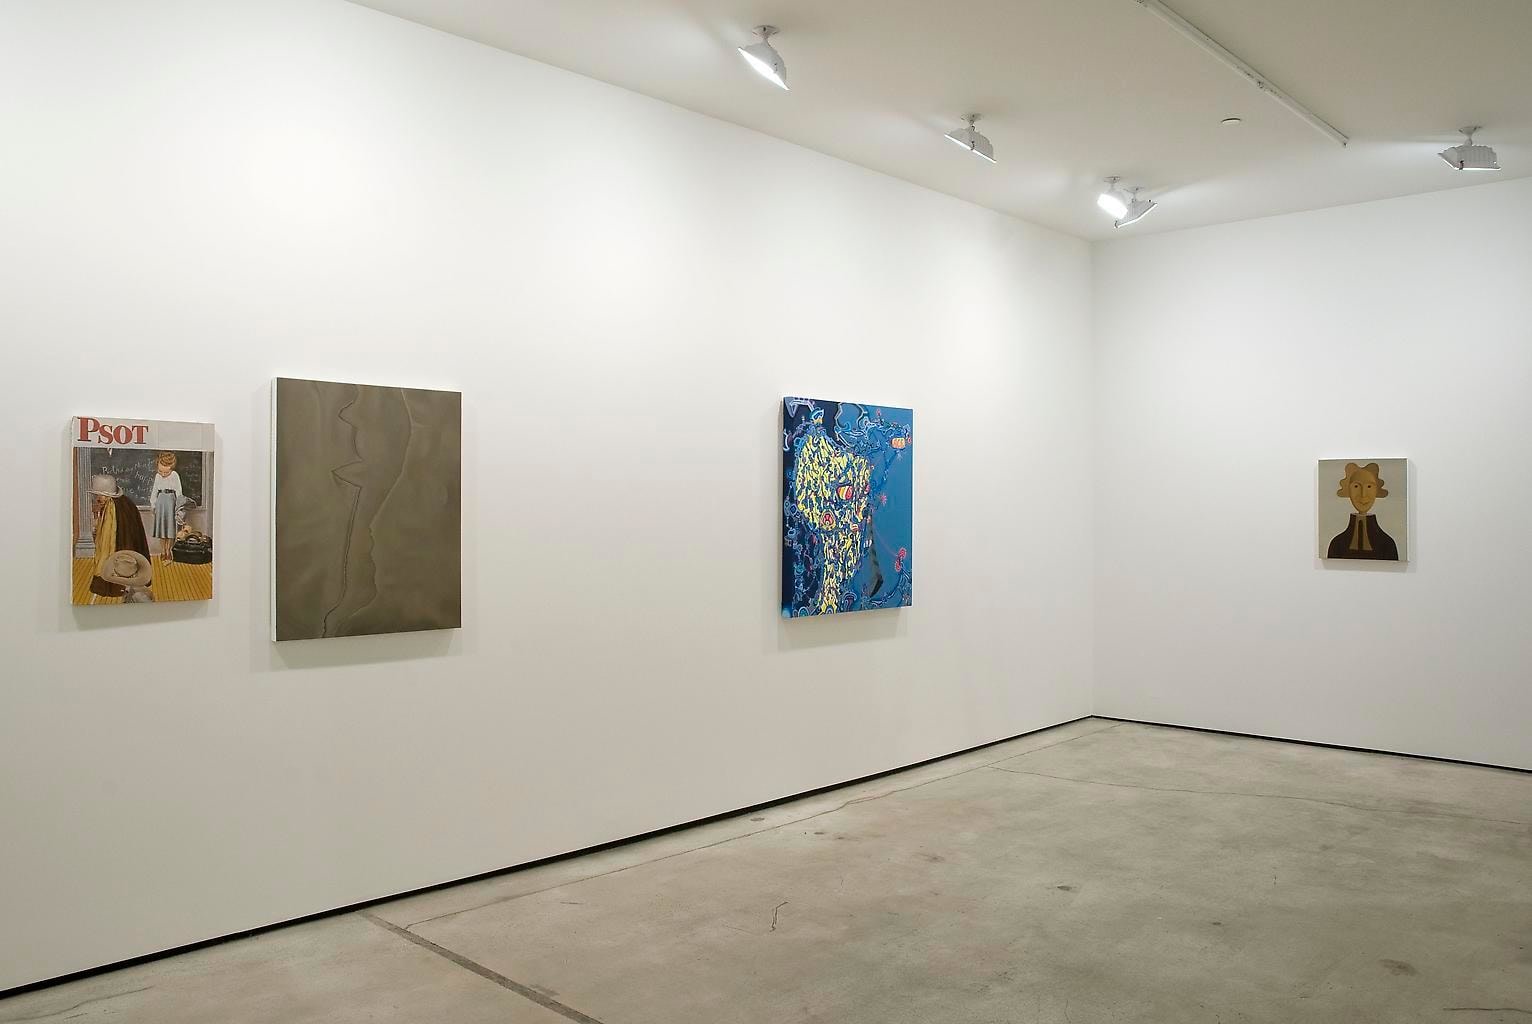  Installation view, Private Future, Marc Jancou, New York, December 9, 2010 - January 29, 2011